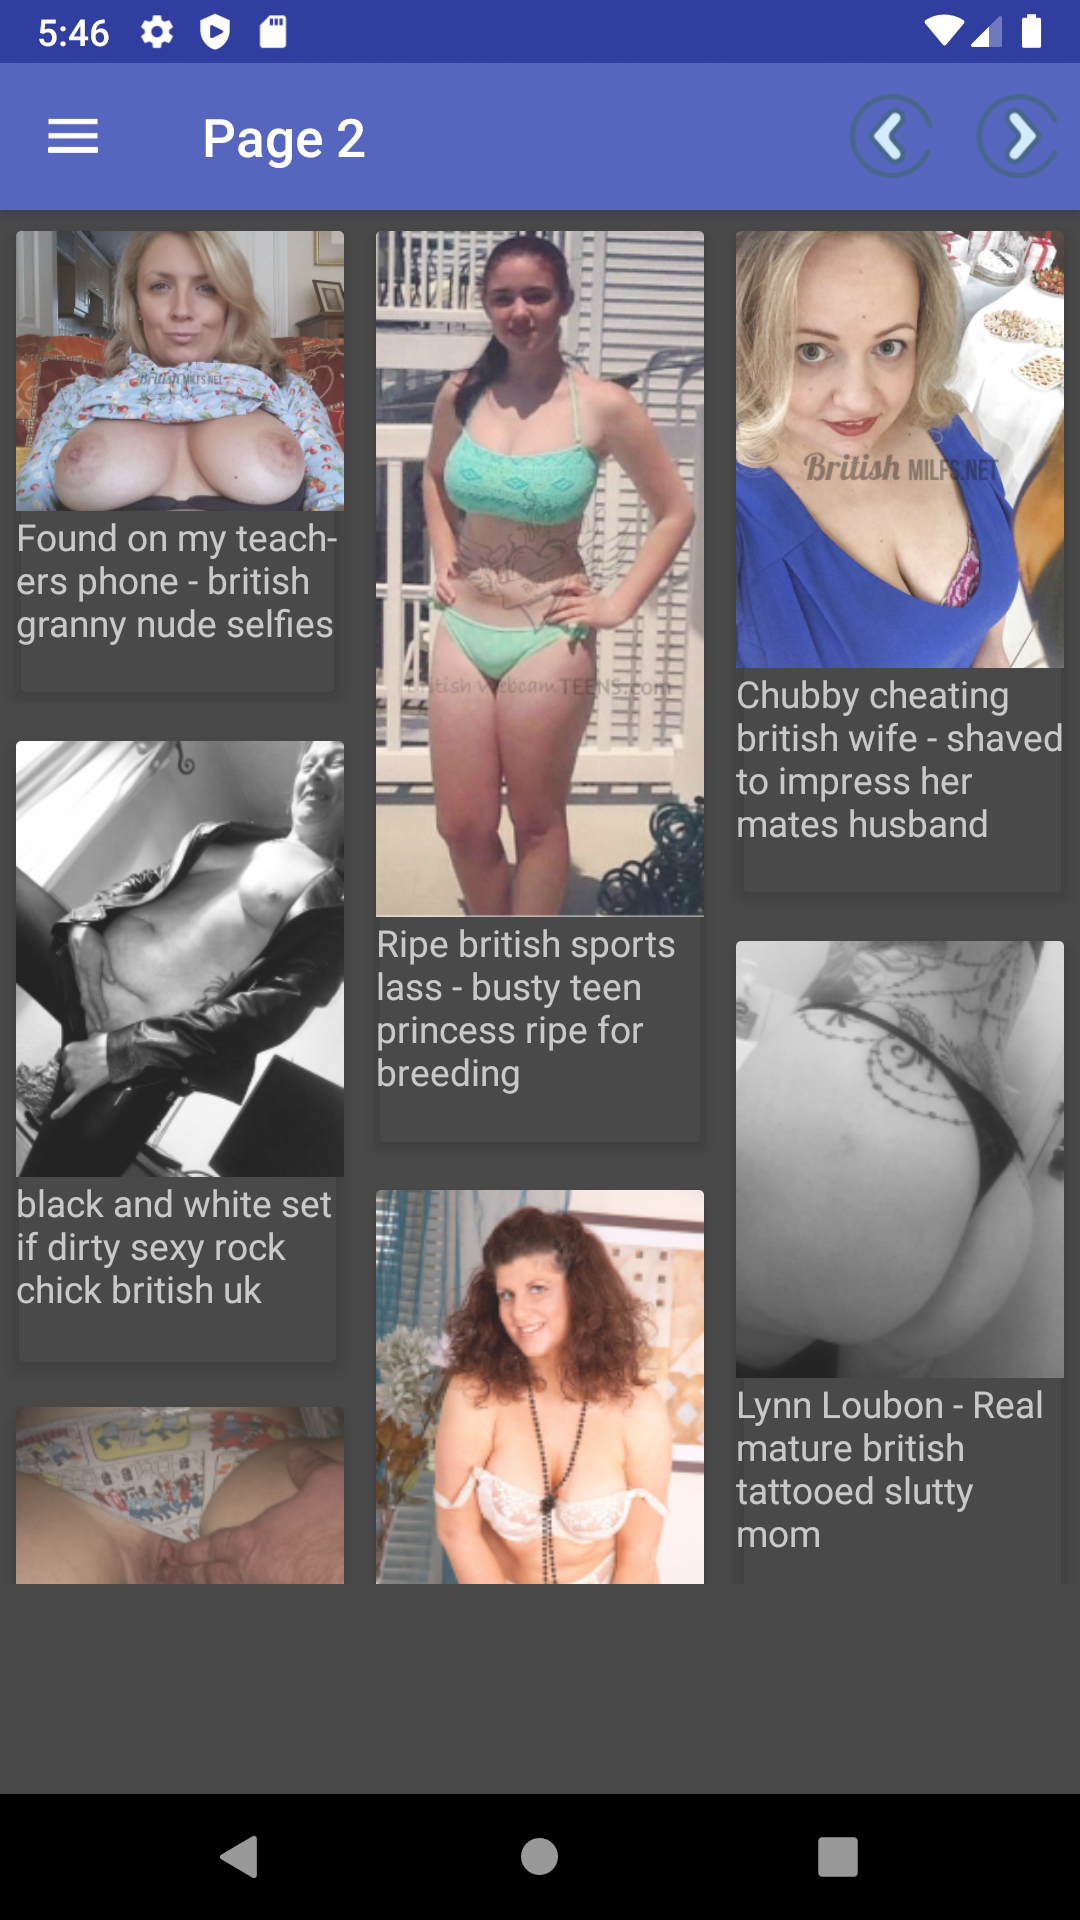 British Porn mobile,adult,images,hentia,app,titties,pegging,pornstars,gallery,demonic,apk,lair,mythras,sexy,fuck,porn,for,photos,daily,best,video,apps,galleries,hot,feast,andriod,hentai